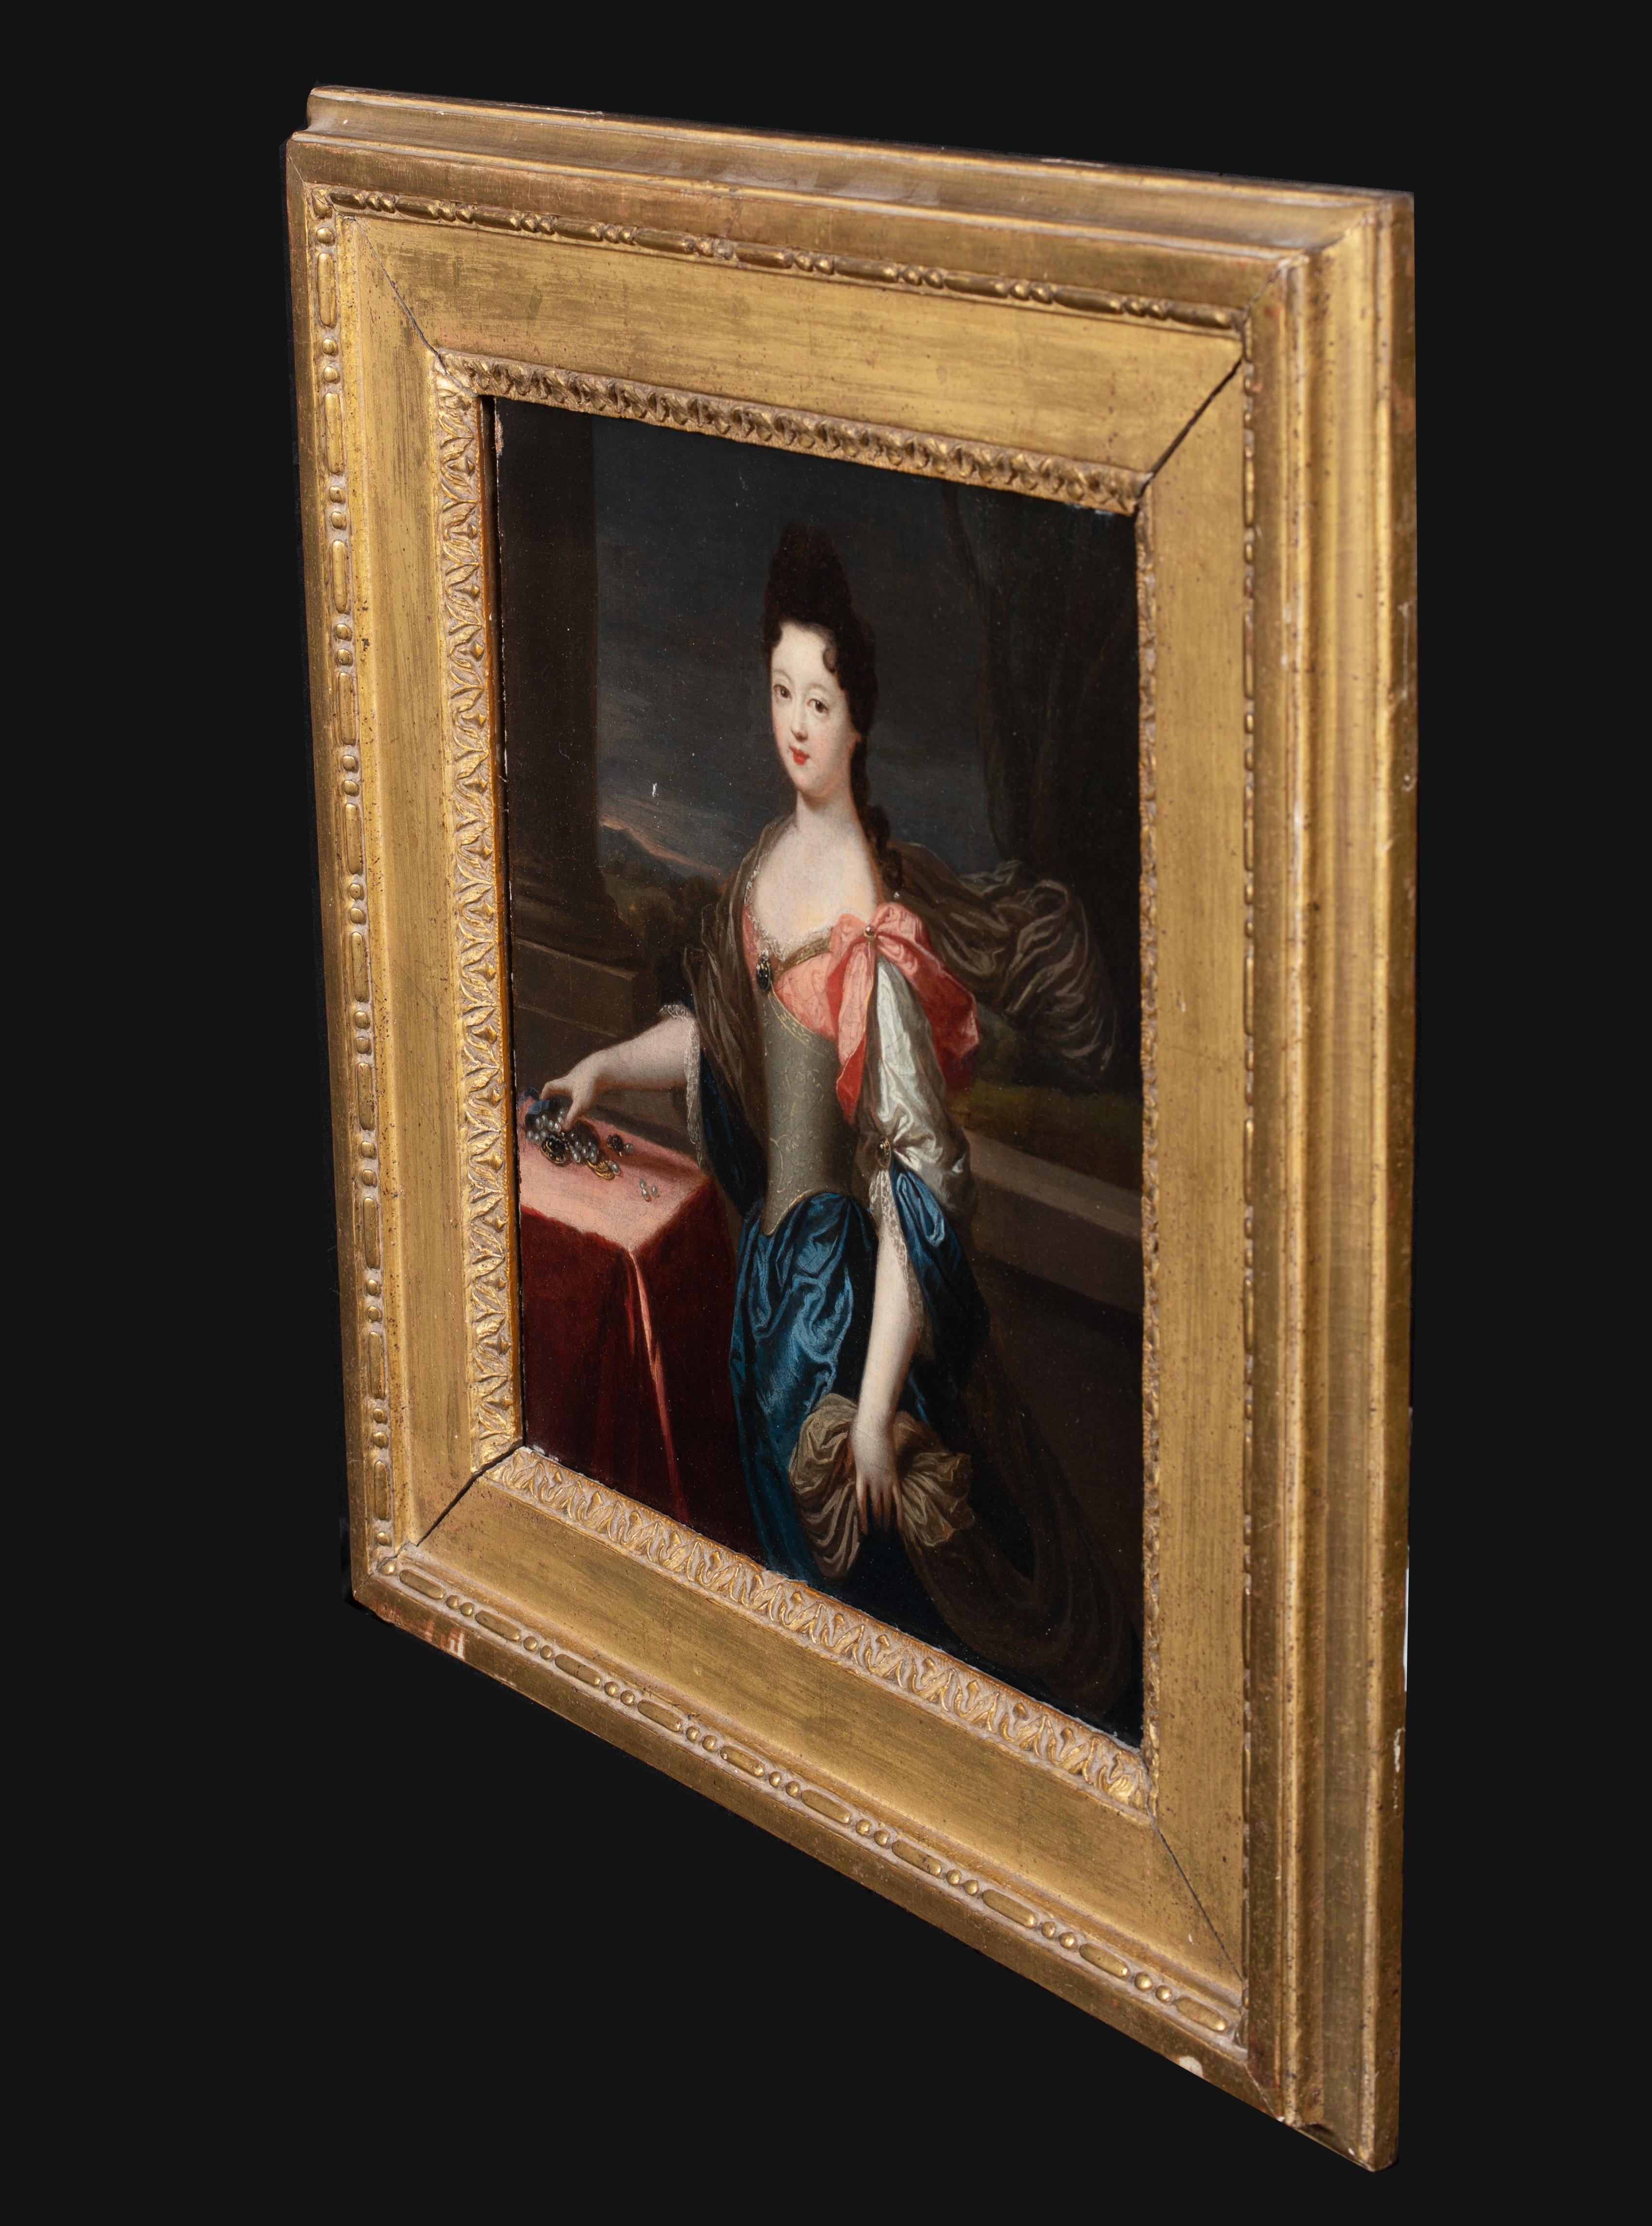 Portrait Of Charlotte Aglae d'Orleans (1700-1761) Duchess of Modene

Circle of Pierre Gobert (1662-1744)

Large 18th Century portrait of a young Chalotte d'Orleans, Duchess of Modene, oil on canvas. Excellent quality and condition circa 1720